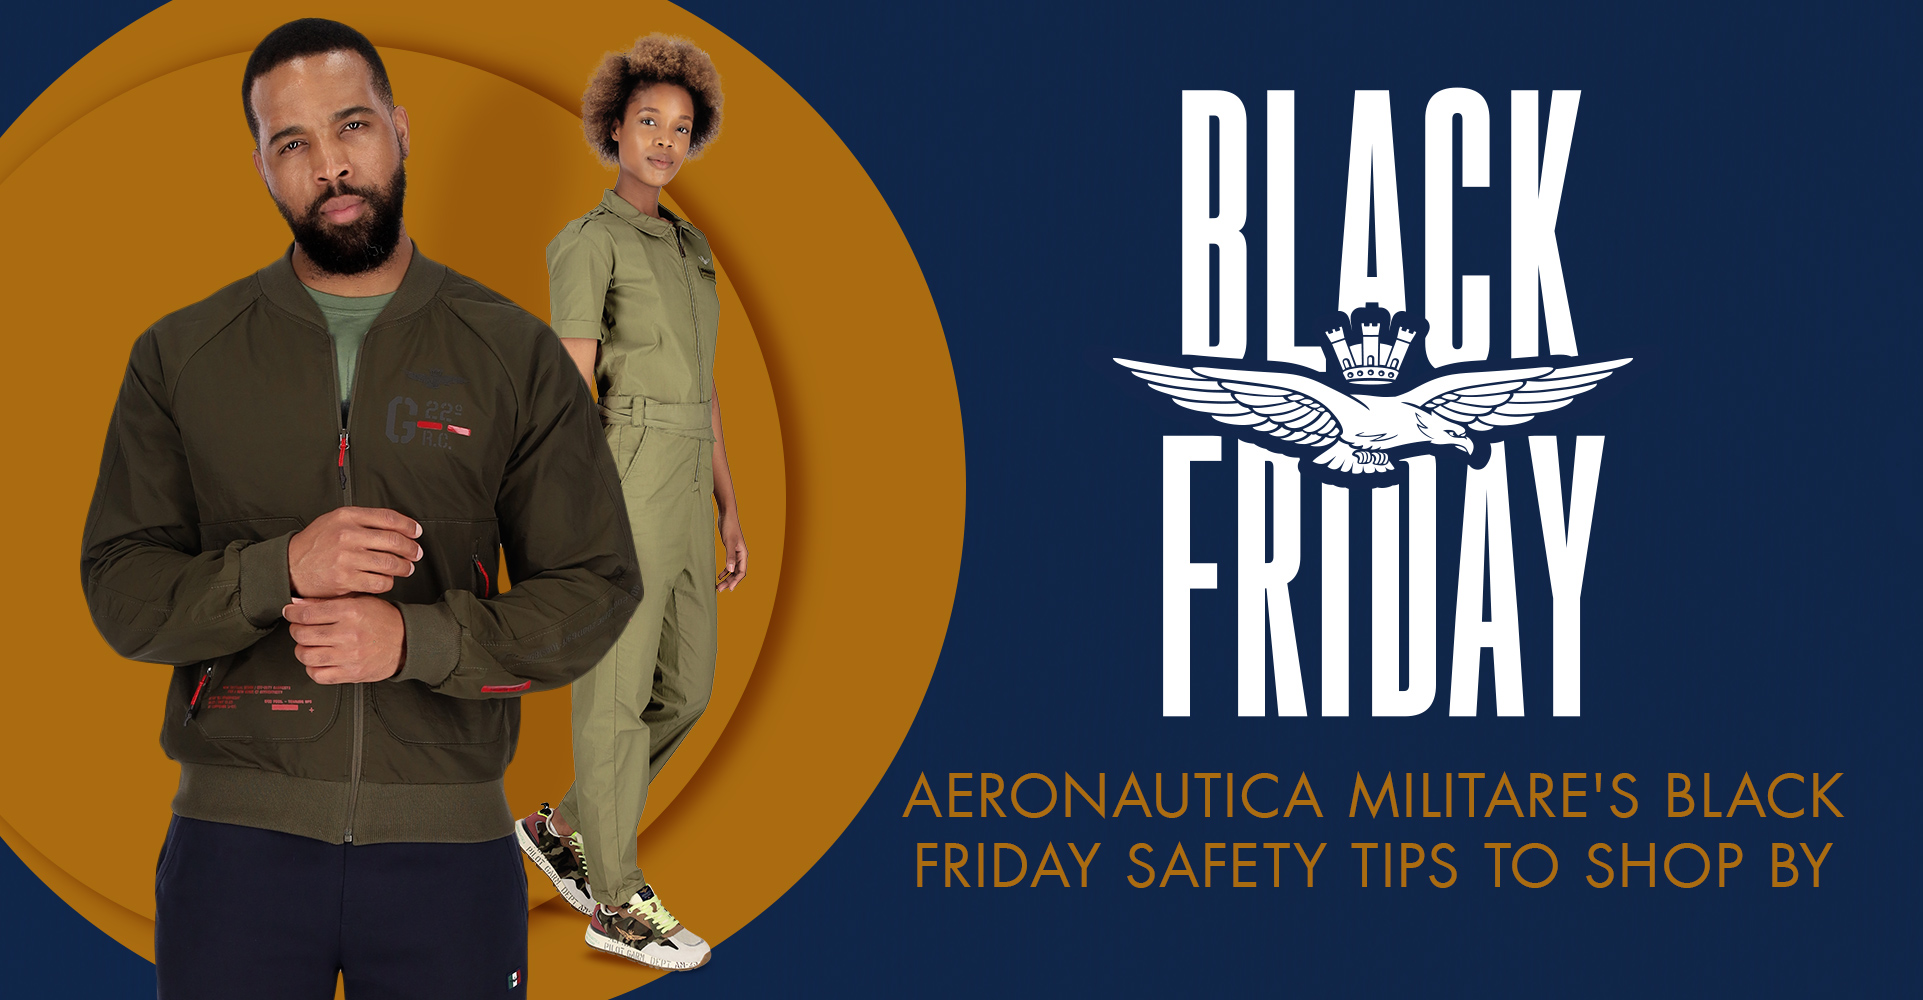 Aeronautica Militare's Black Friday Safety Tips To Shop By